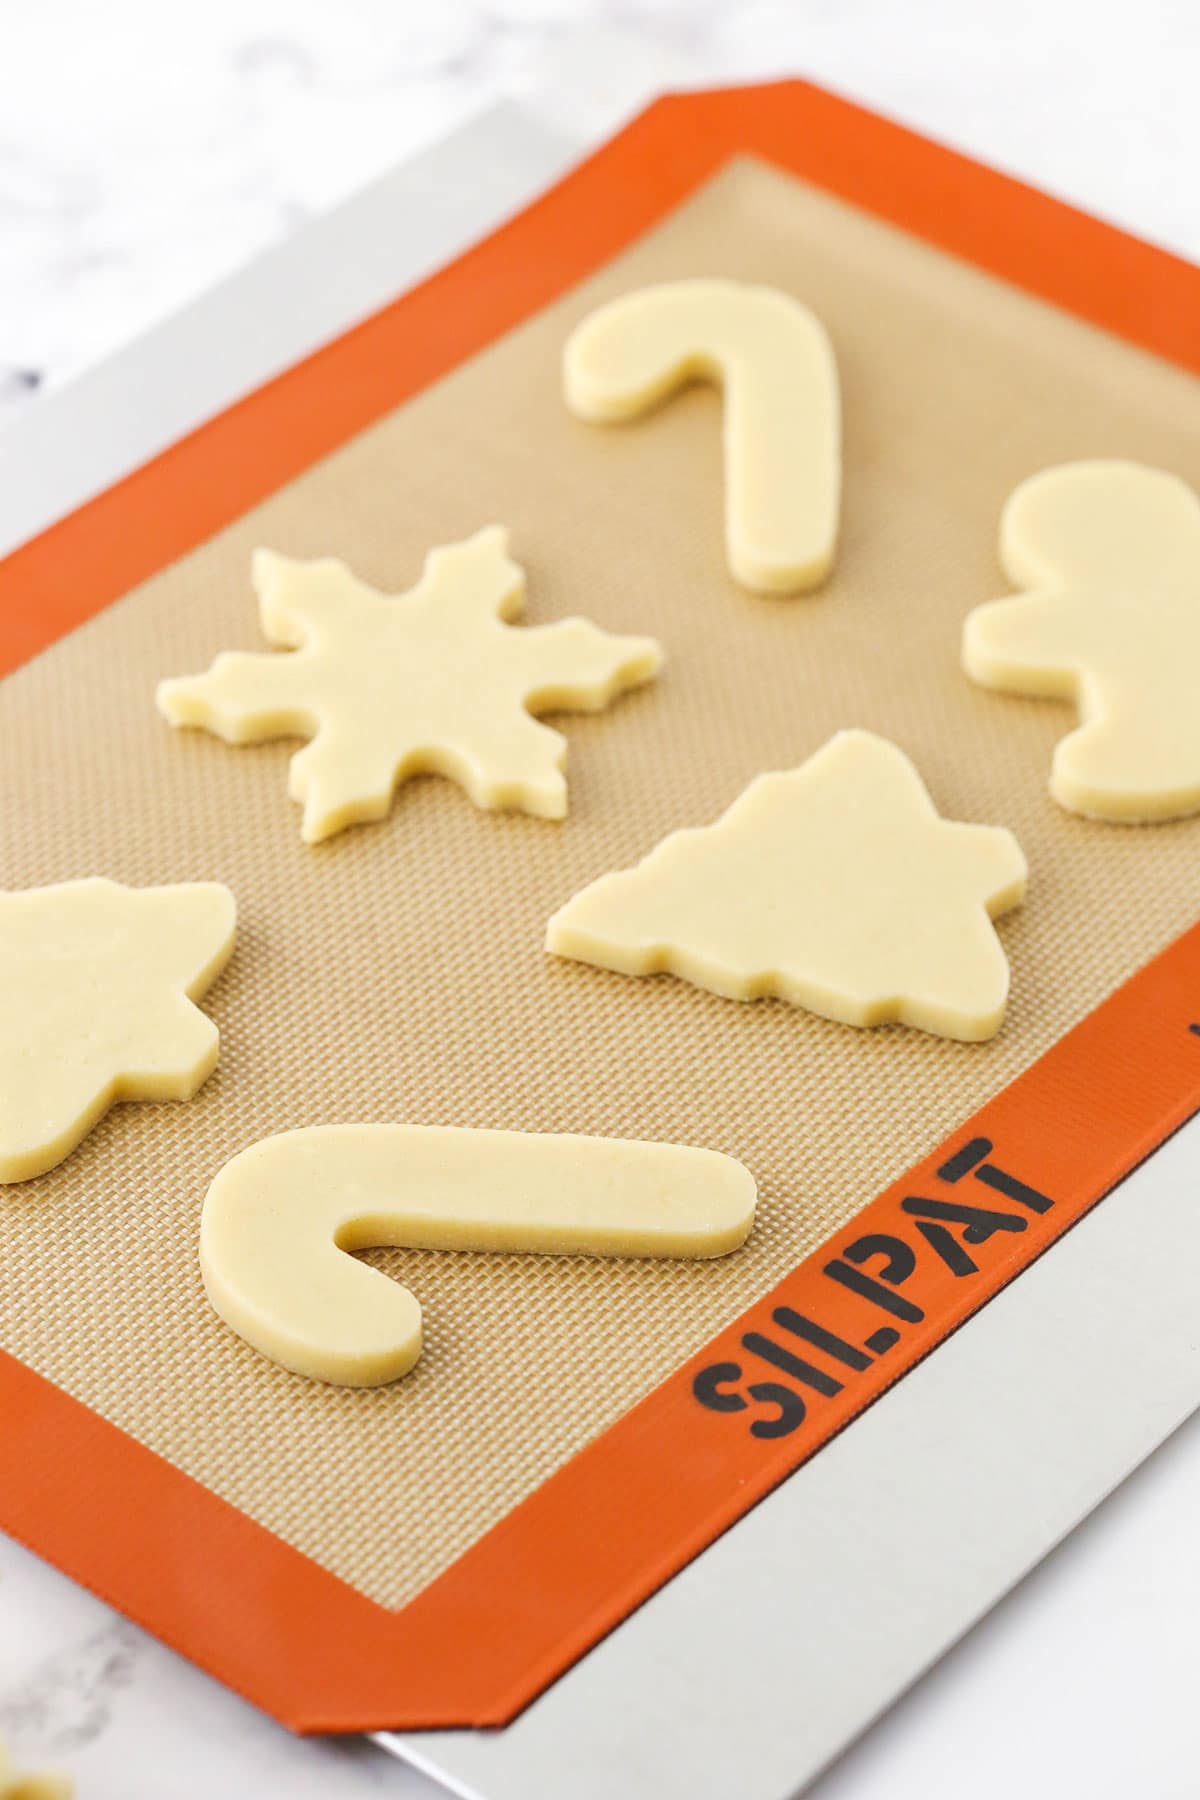 Six unbaked sugar cookies on a baking sheet covered with a Silpat liner